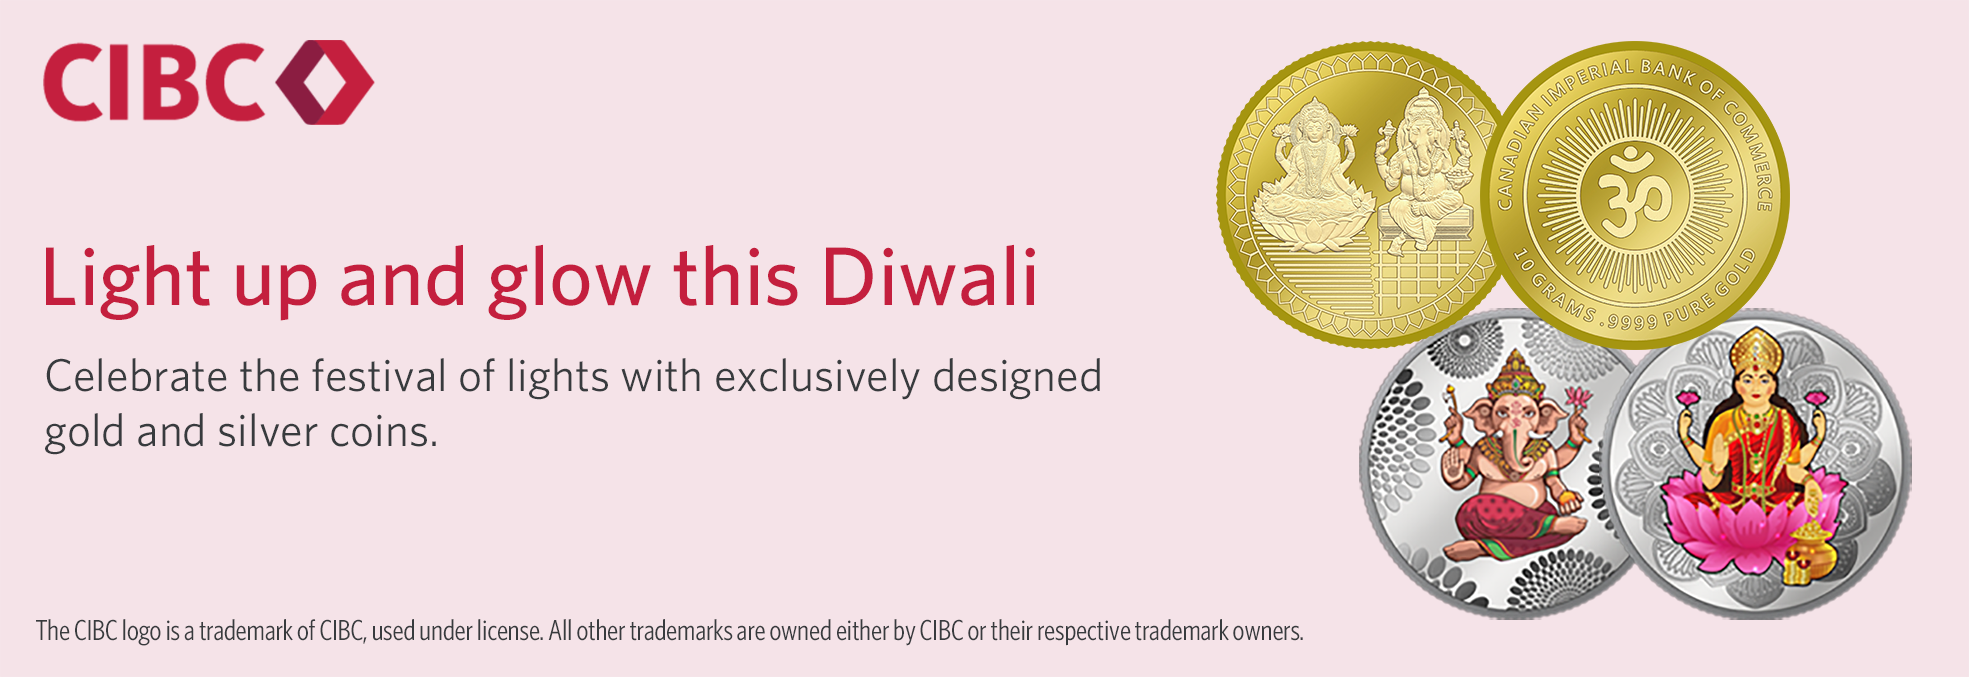 Light up and glow this Diwali. Celebrate the festival of lights with exclusively designed gold and silver coins.